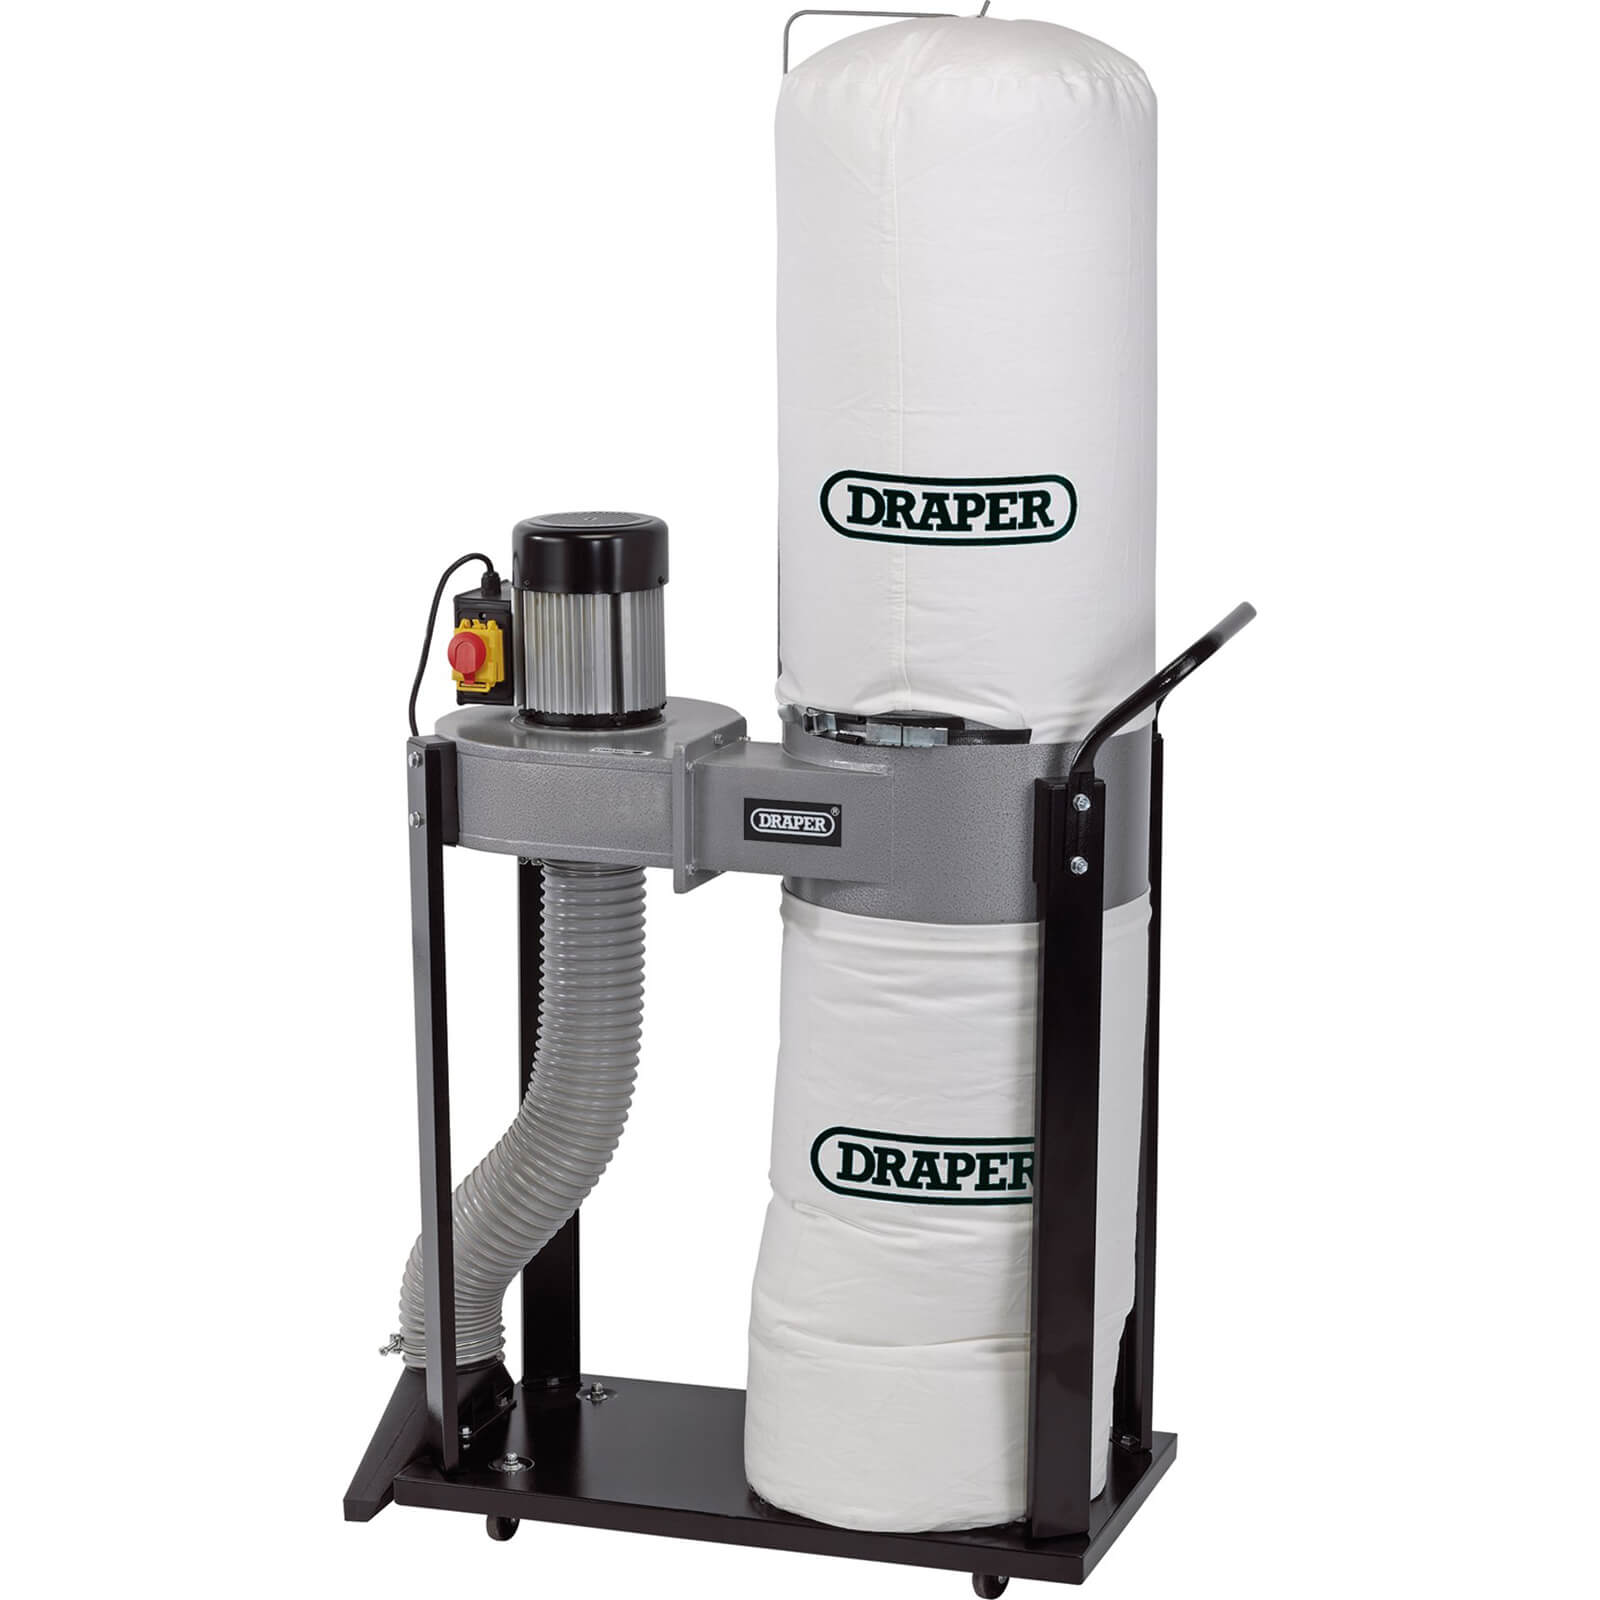 Image of Draper DE750A Portable Wood Chip and Dust Extractor 240v